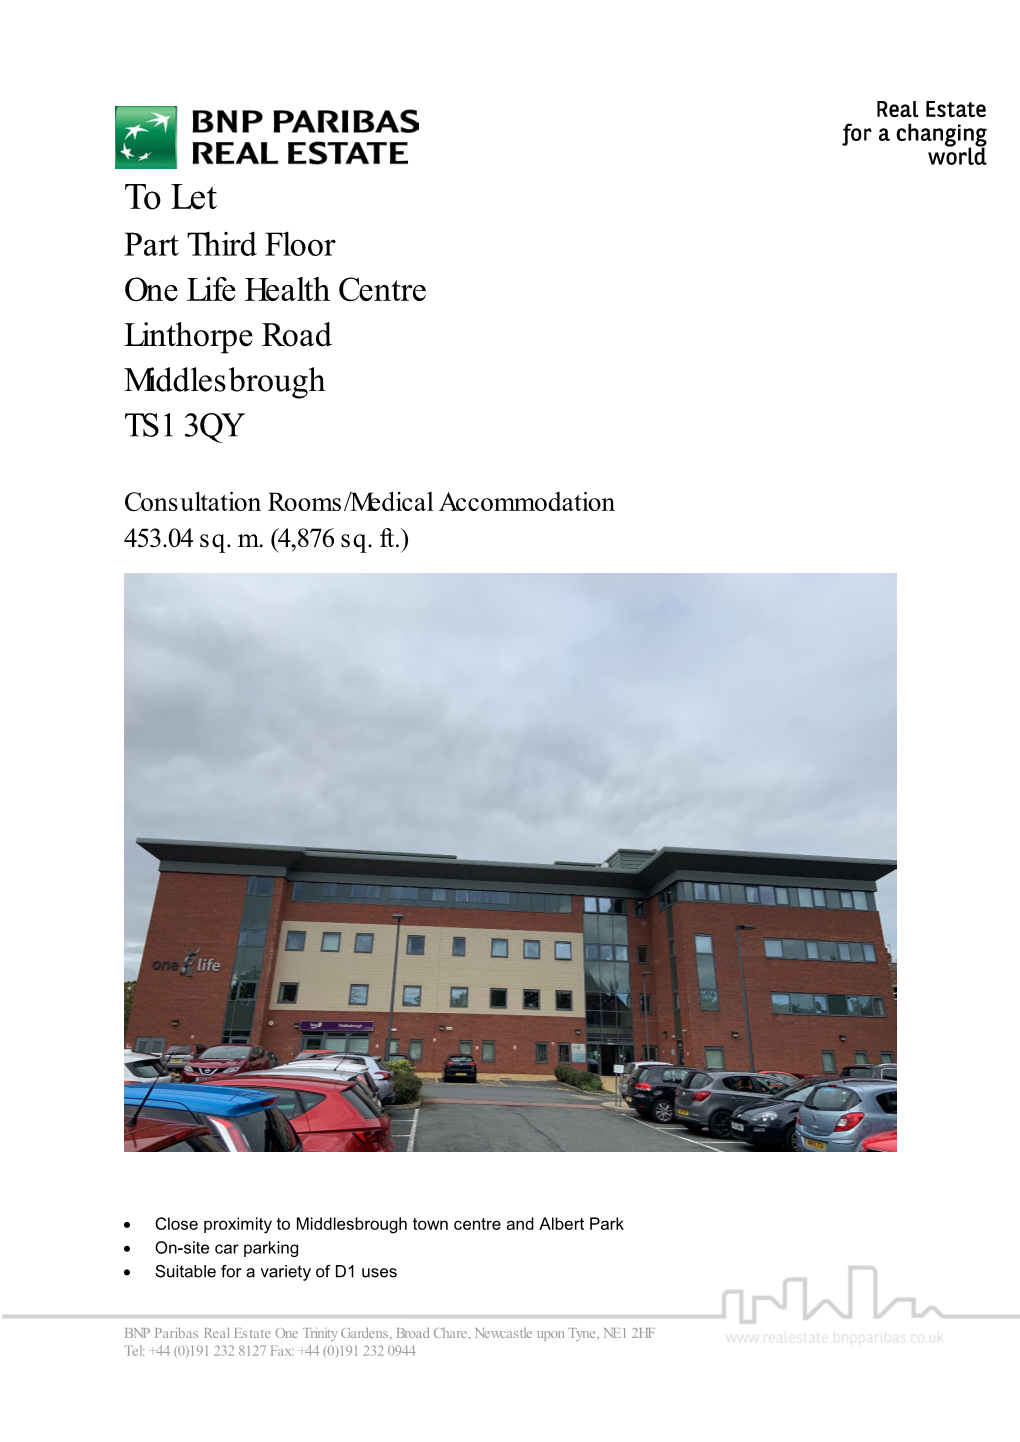 To Let Part Third Floor One Life Health Centre Linthorpe Road Middlesbrough TS1 3QY